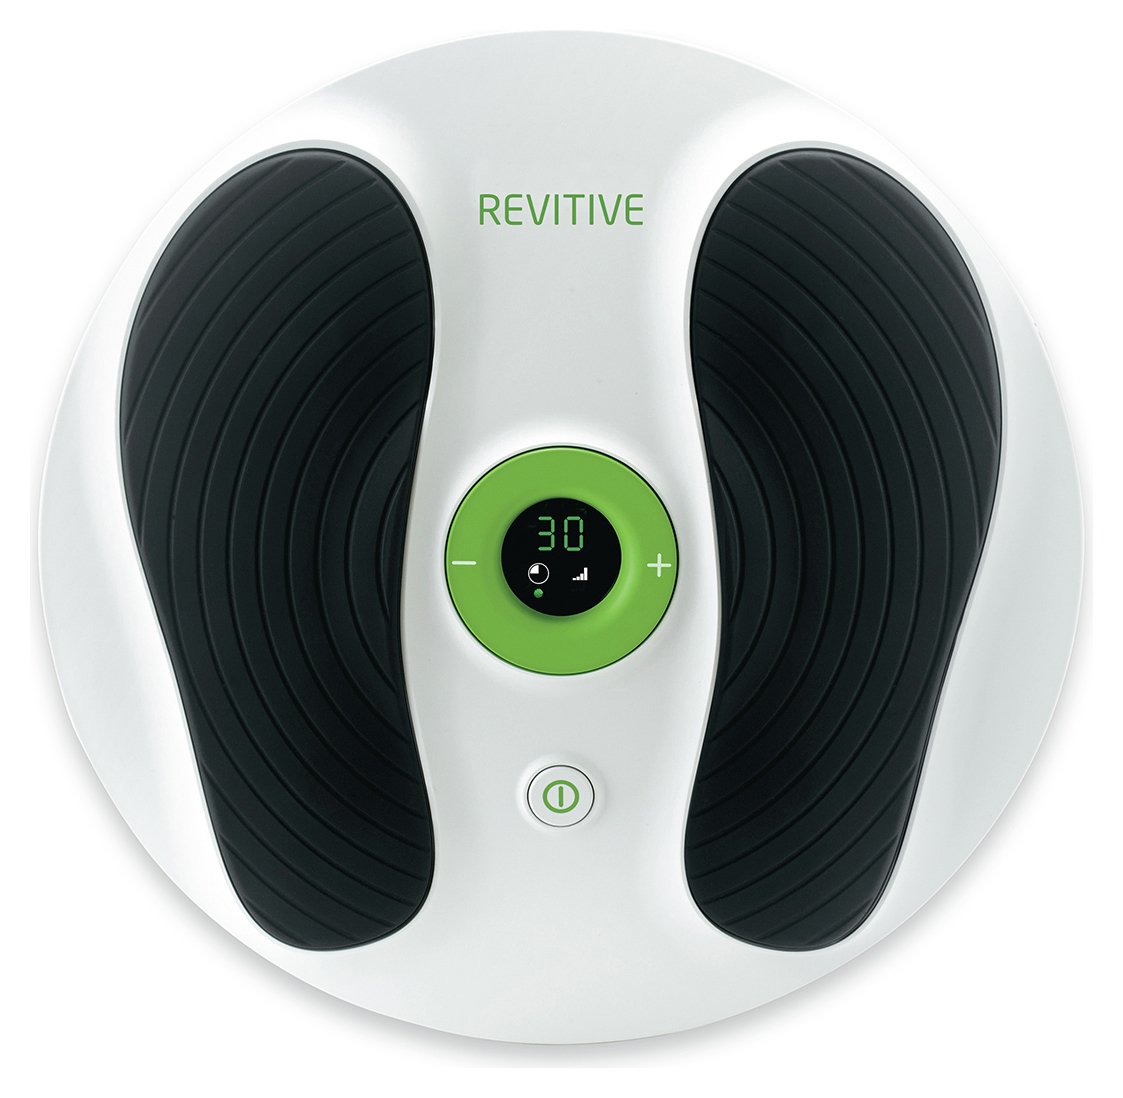 Revitive DX Circulation Booster.